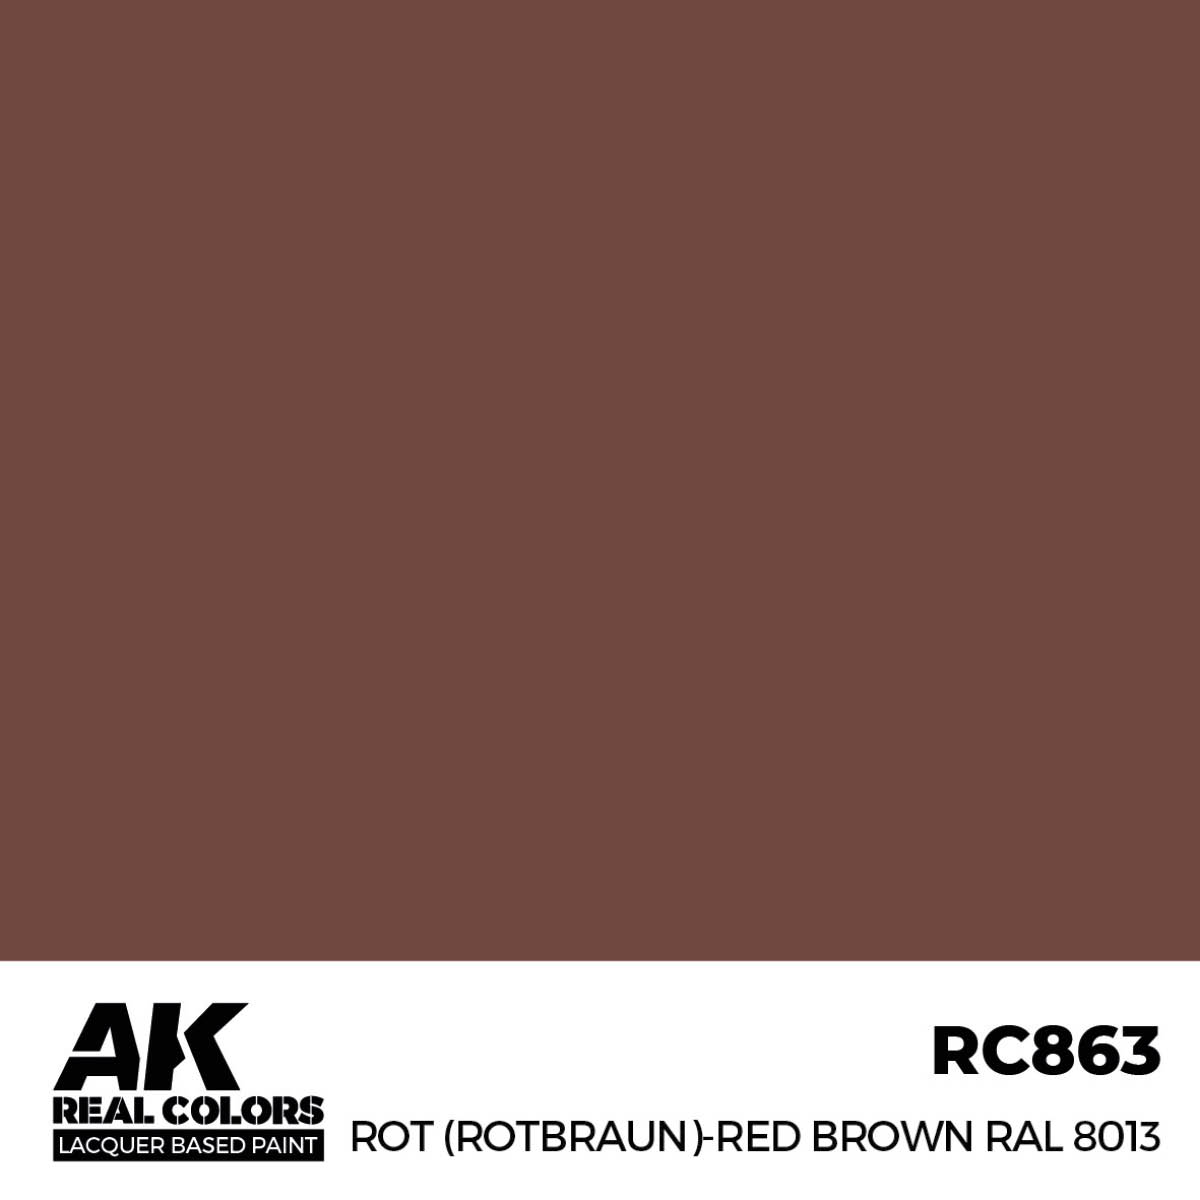 Rot (Rotbraun)-Red (Red Brown) RAL 8013